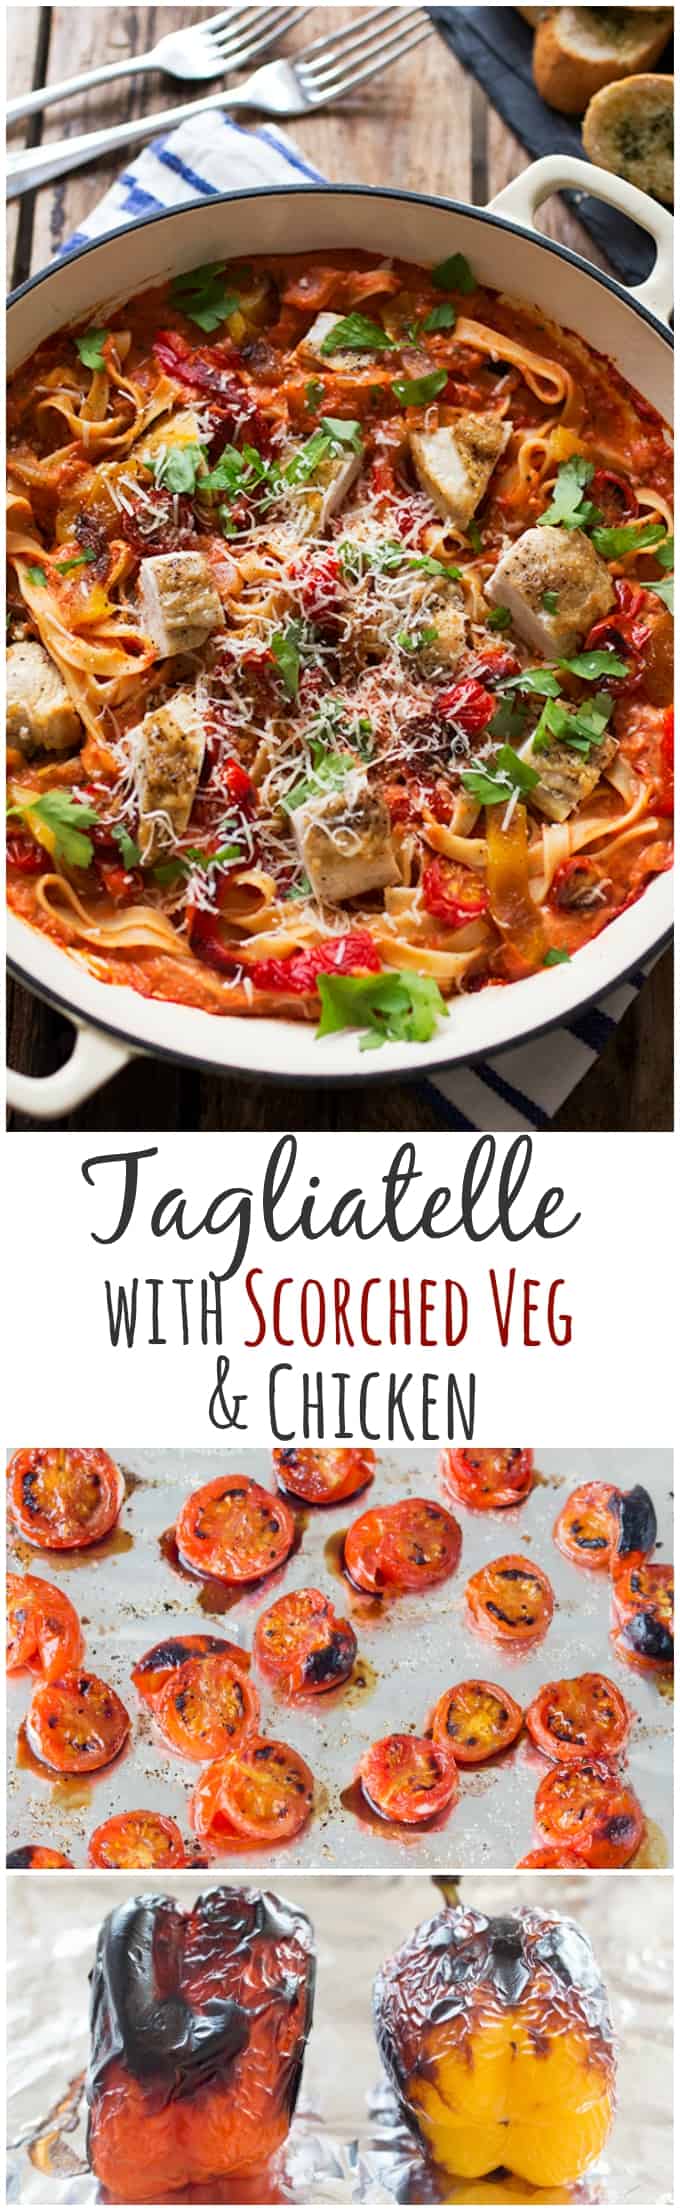 Add extra flavour to your pasta dishes by scorching some tomatoes and peppers under the grill. Mix into a creamy-tomato sauce with tagliatelle and chicken for a dinner that's less than 470 calories (slimming world friendly too).